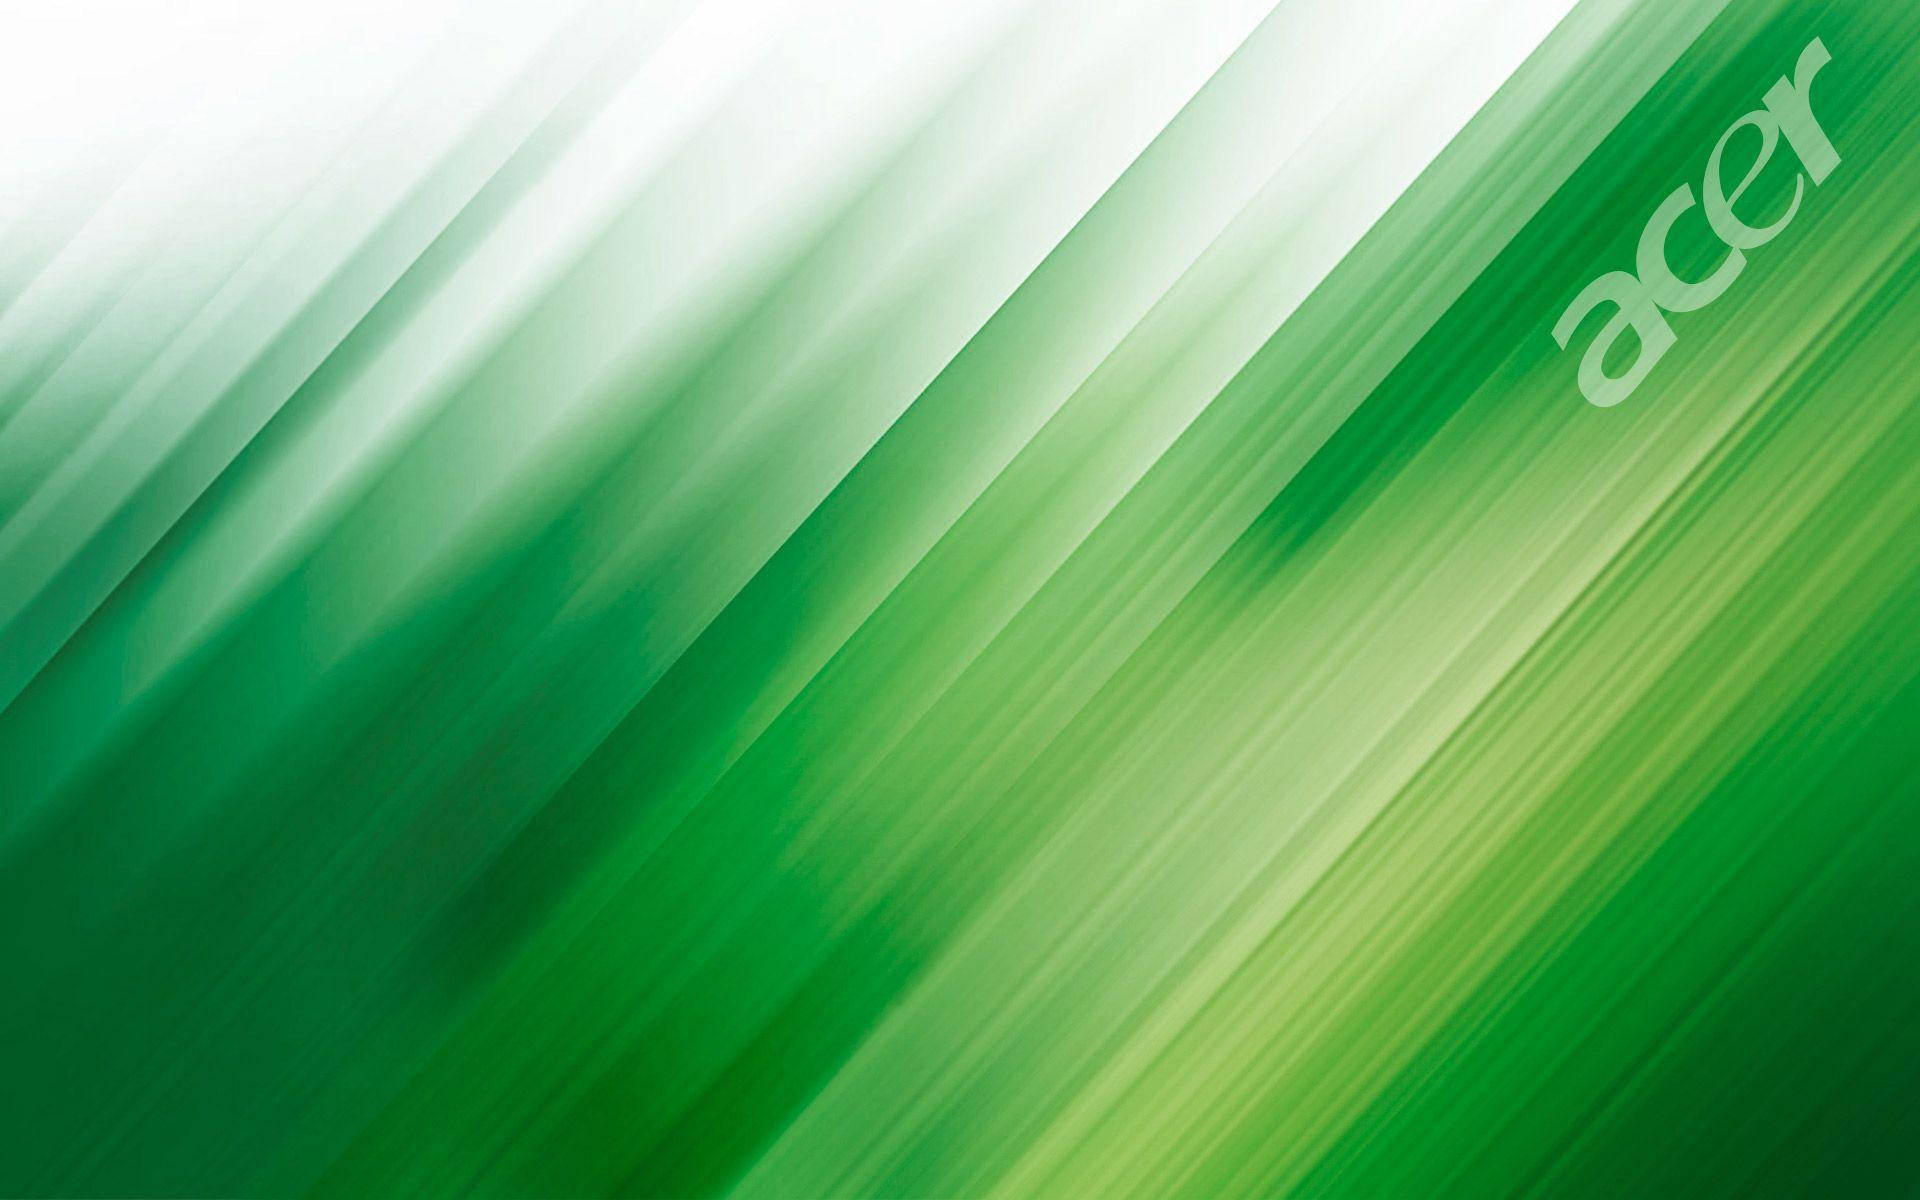 Free Acer Wallpaper Downloads, [100+] Acer Wallpapers for FREE | Wallpapers .com